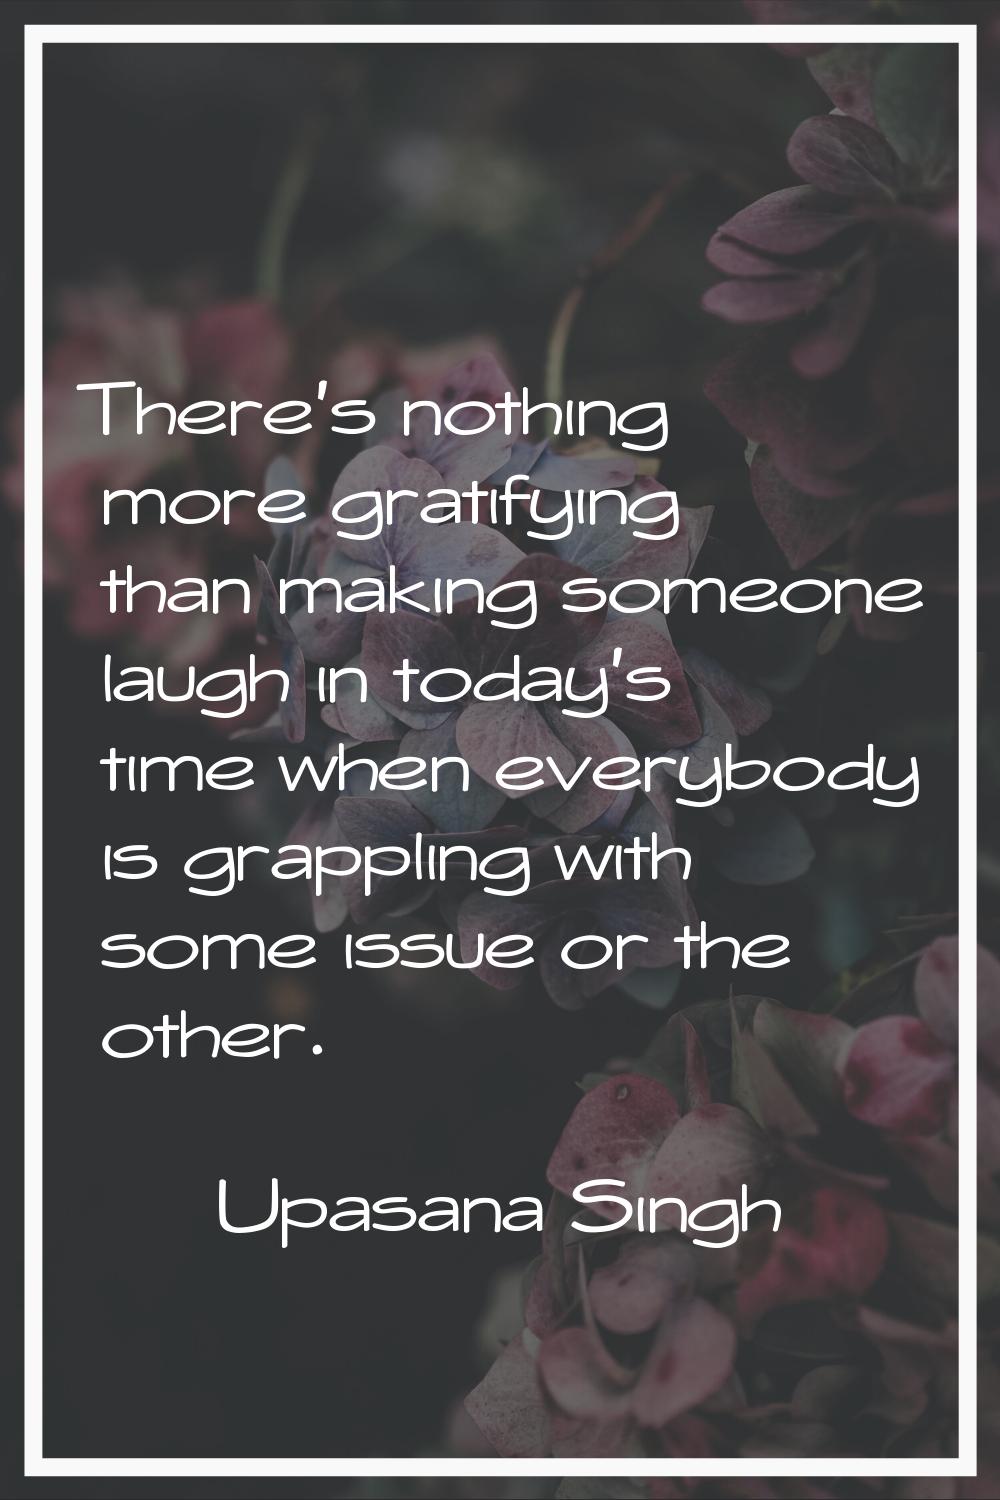 There's nothing more gratifying than making someone laugh in today's time when everybody is grappli